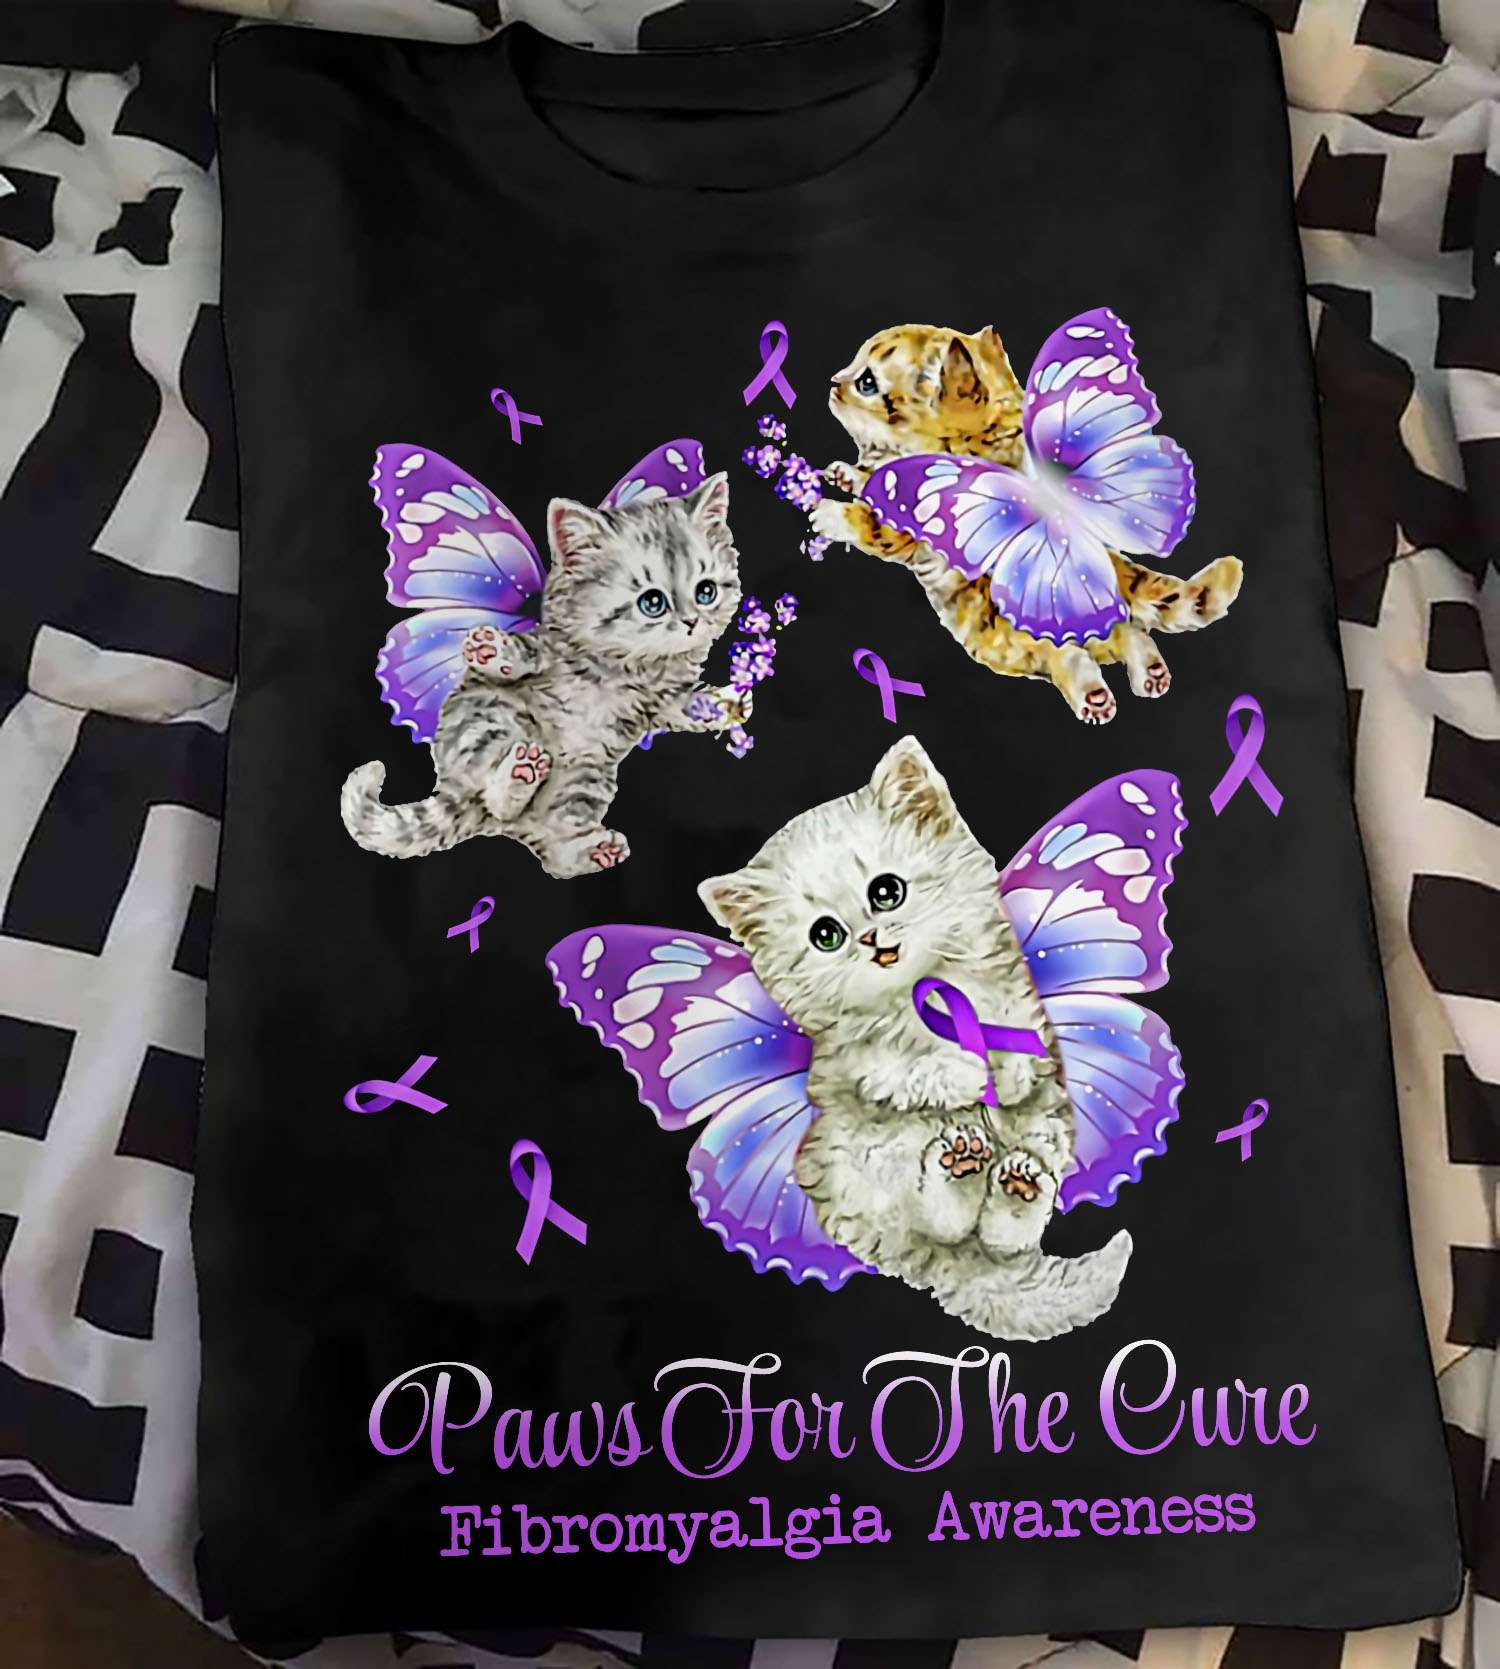 Paws for the cure - Fibromyalgia awareness, kitty cat with wings